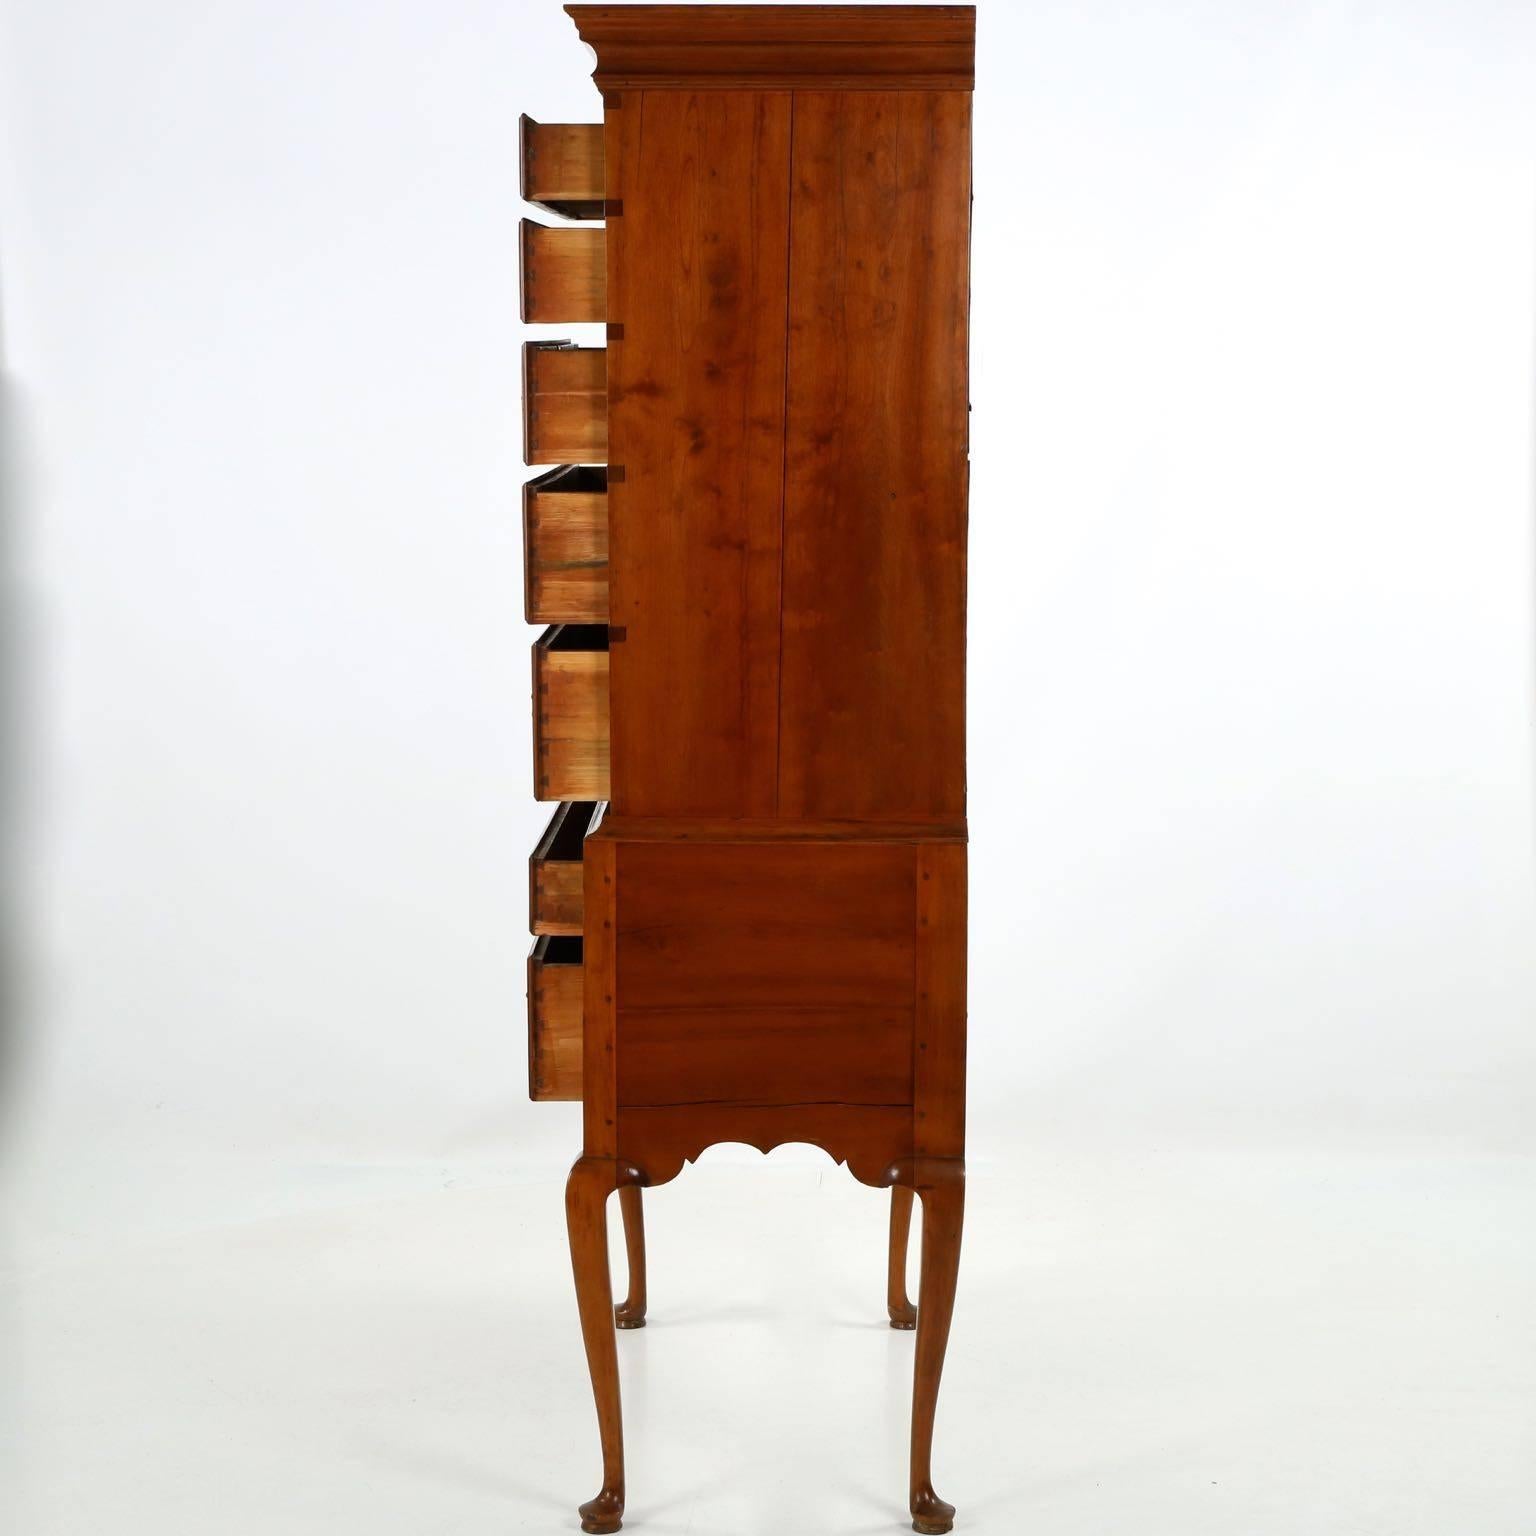 This fine and incredibly striking work of art is distinct for the austerity of the form set against a most lively scroll cut apron. Entirely original, though carefully refinished during the last century, the highboy survives in simply outstanding